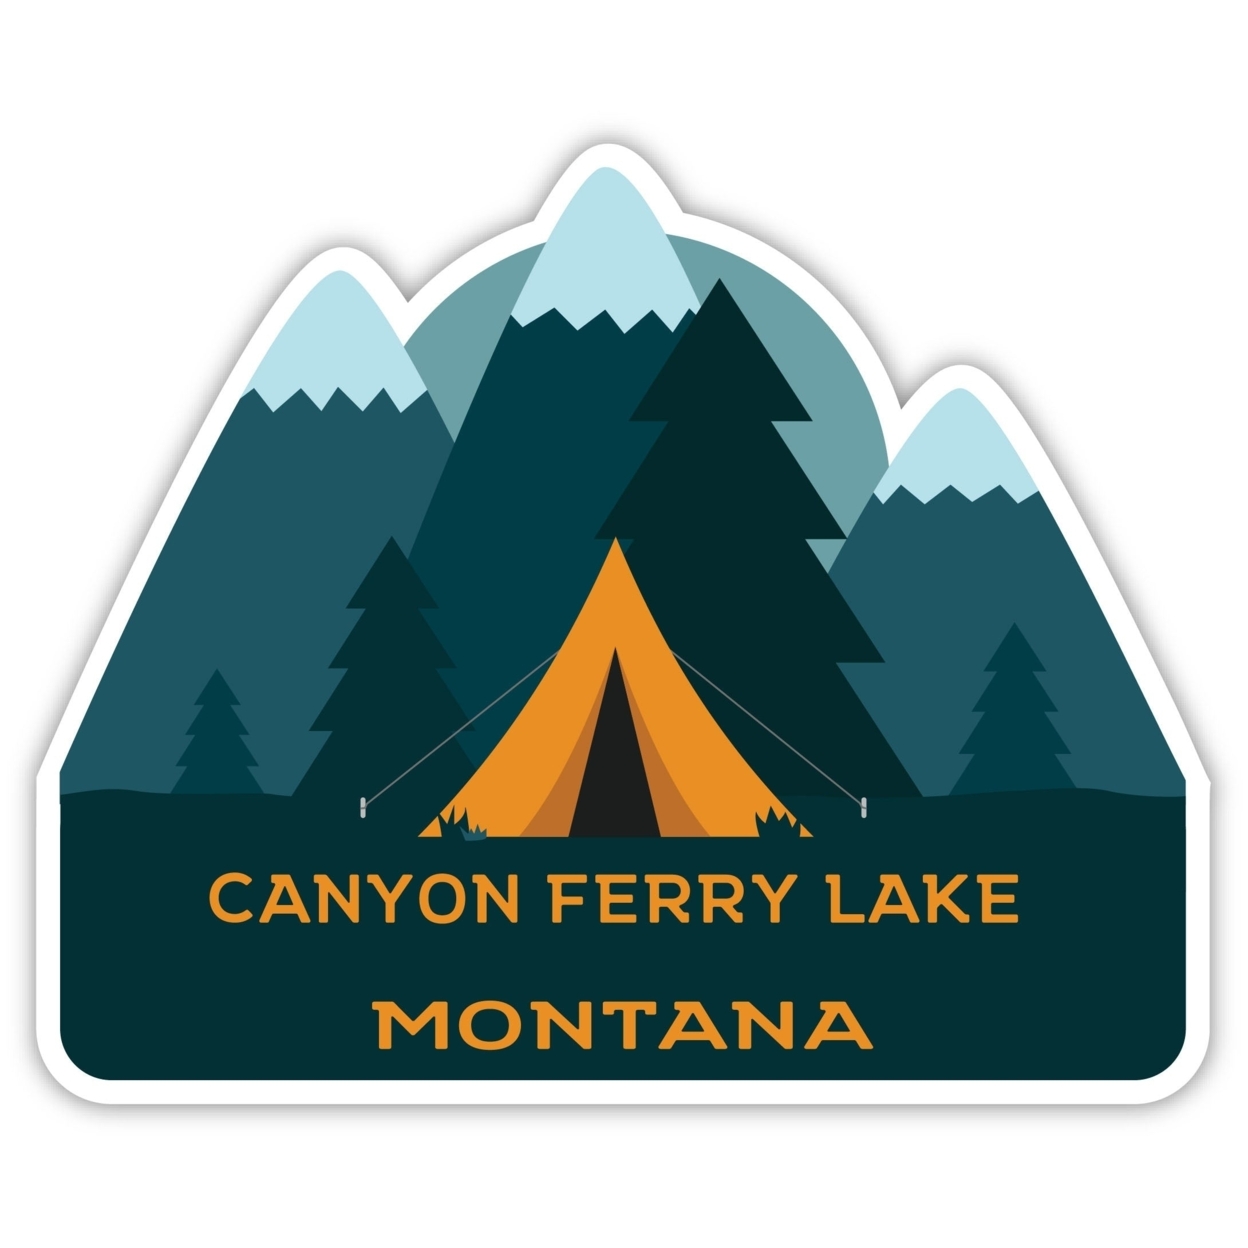 Canyon Ferry Lake Montana Souvenir Decorative Stickers (Choose Theme And Size) - 4-Pack, 2-Inch, Tent